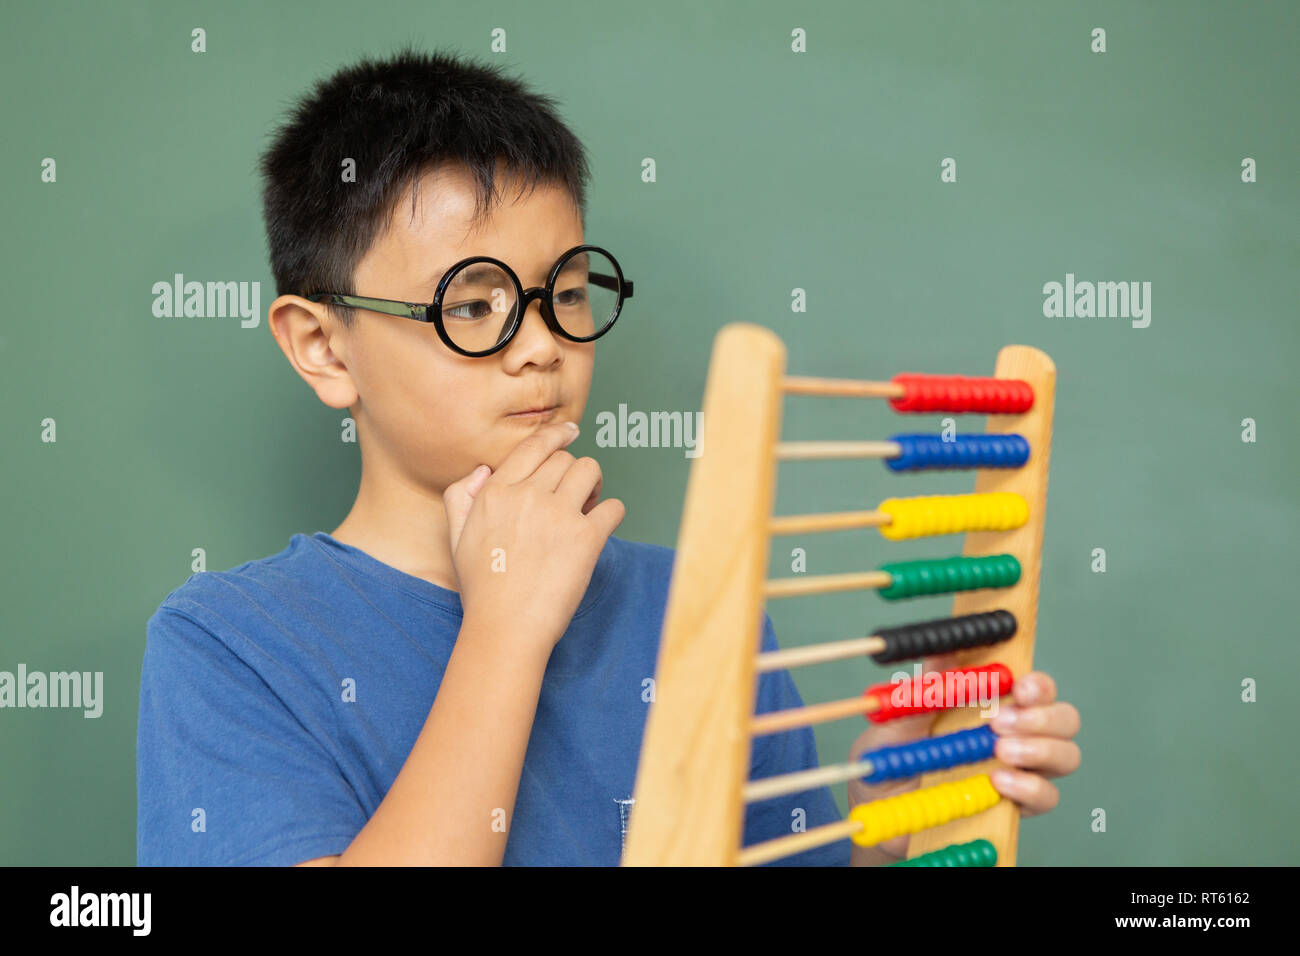 Thoughtful boy learning math with abacus against green chalkboard in a classroom Stock Photo